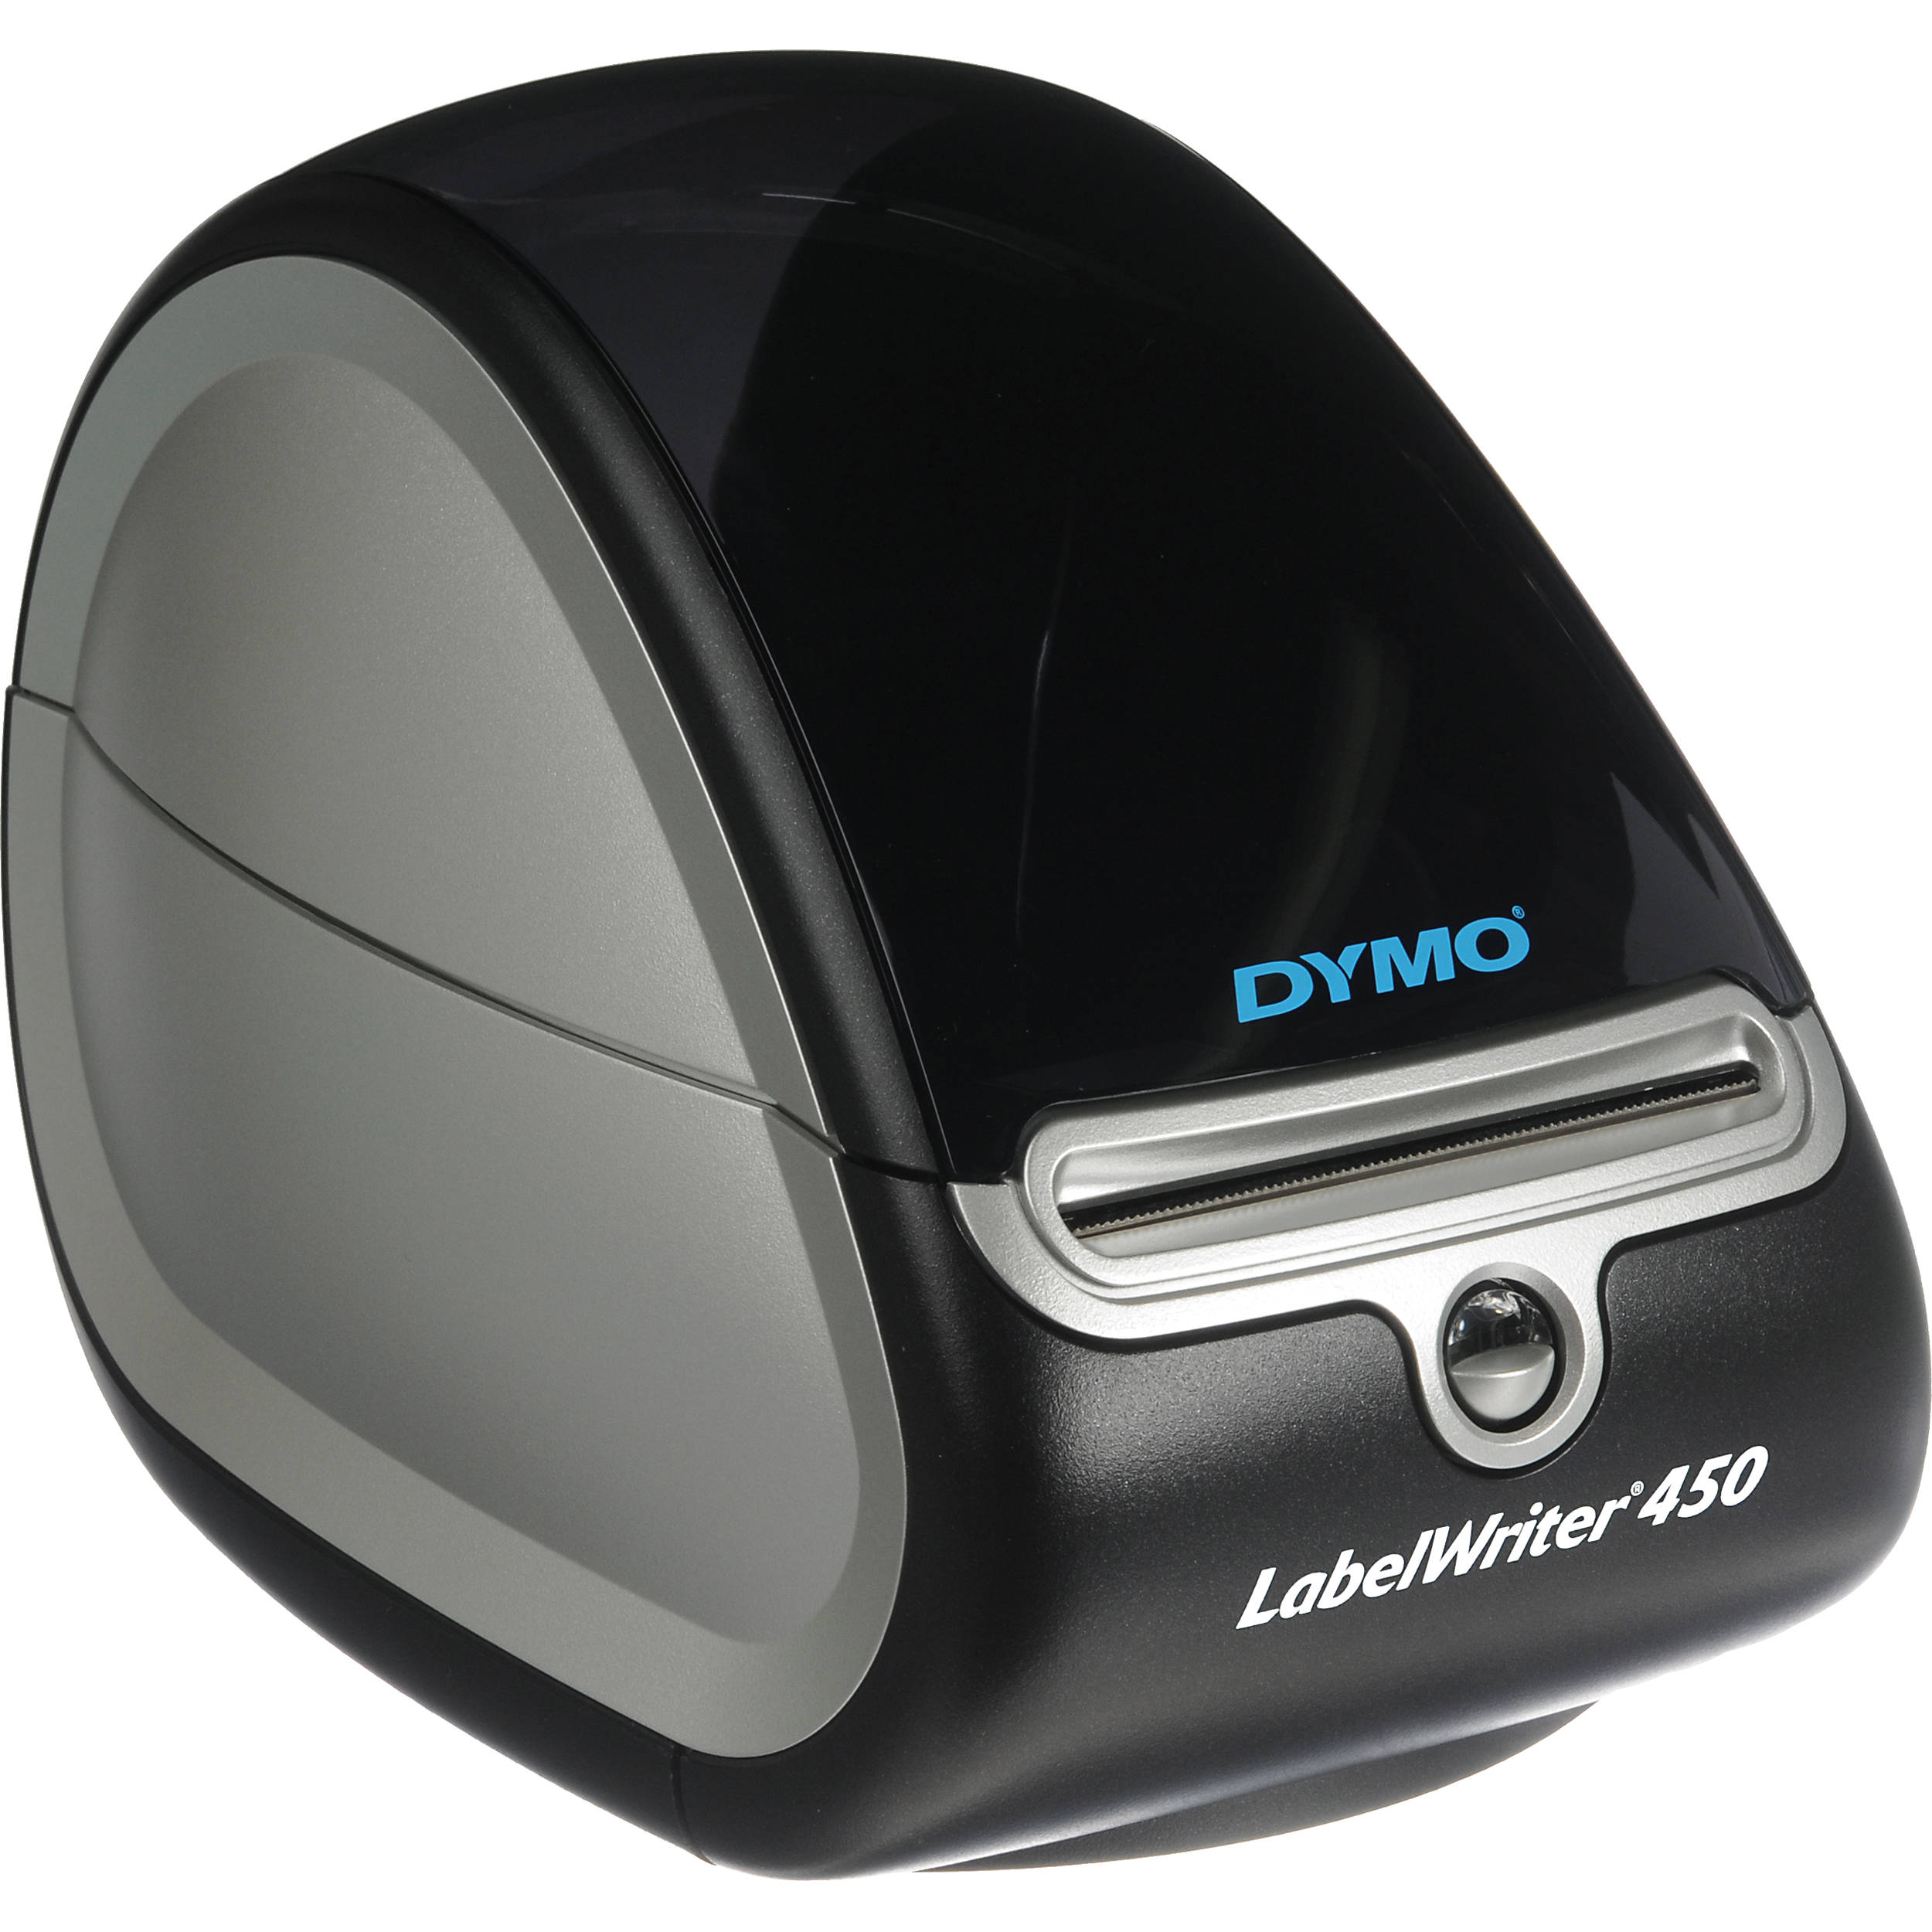 dymo labelwriter duo software for mac